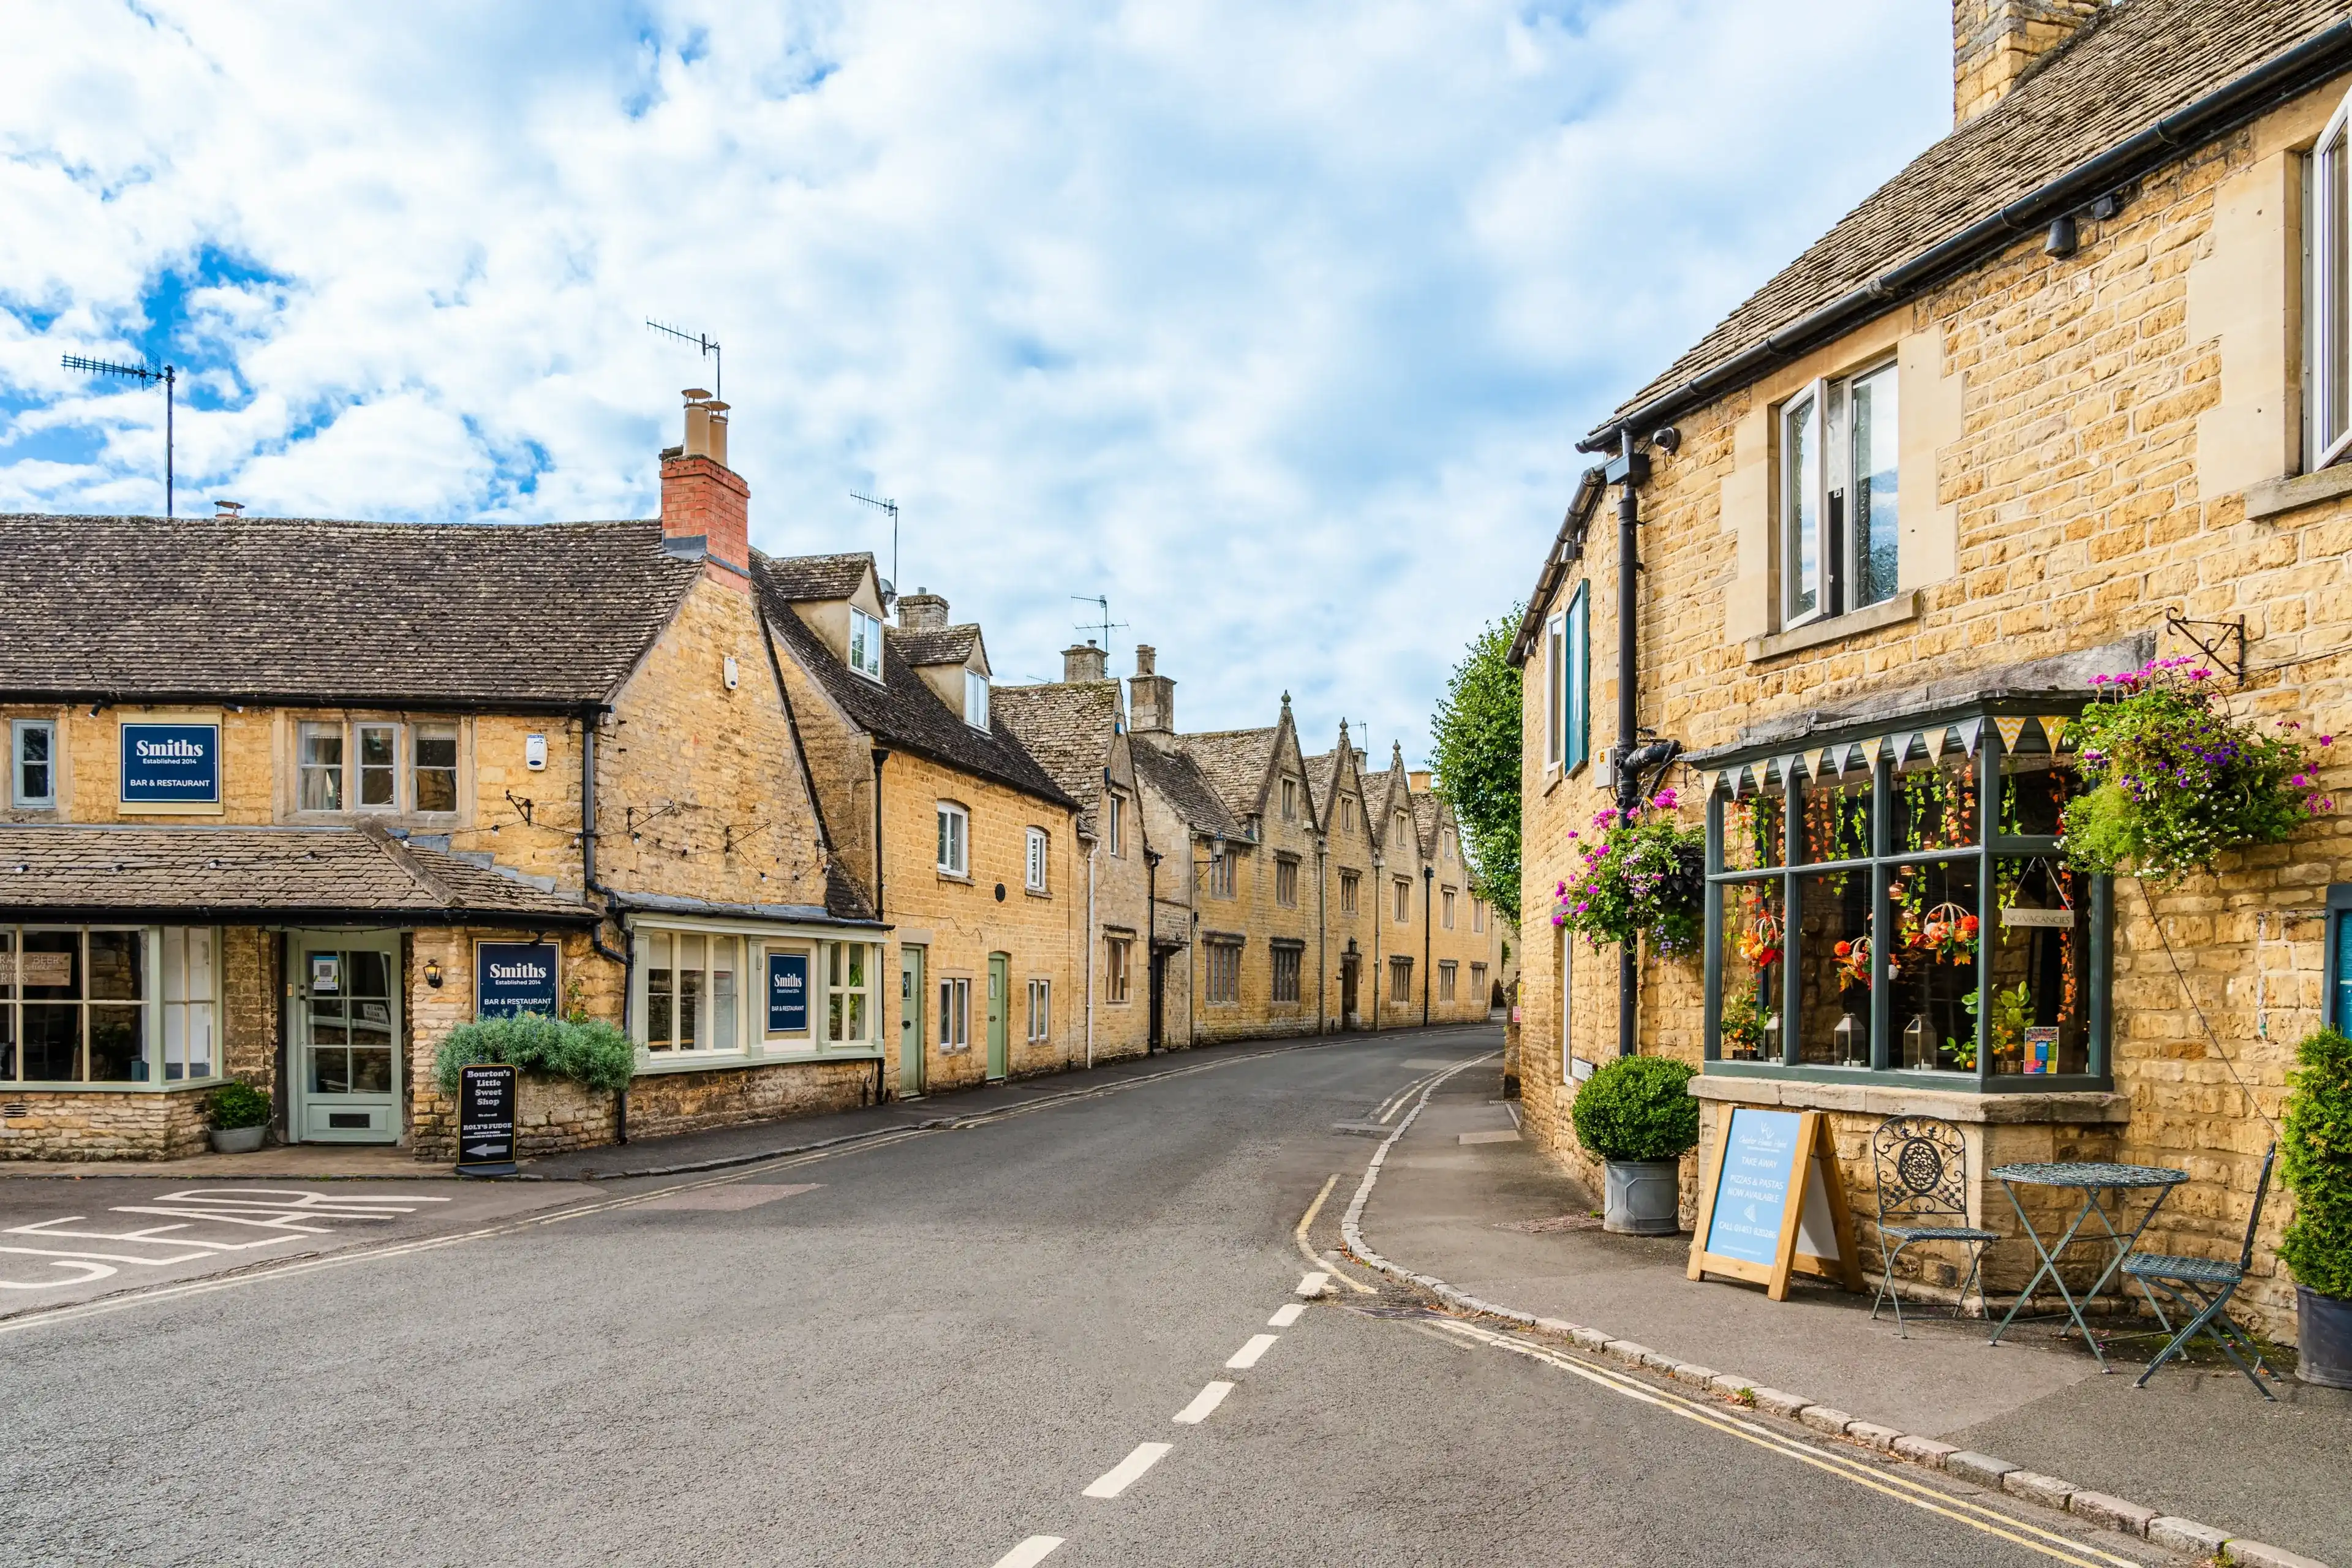  Best Bourton on the Water hotels. Cheap hotels in Bourton on the Water, United Kingdom